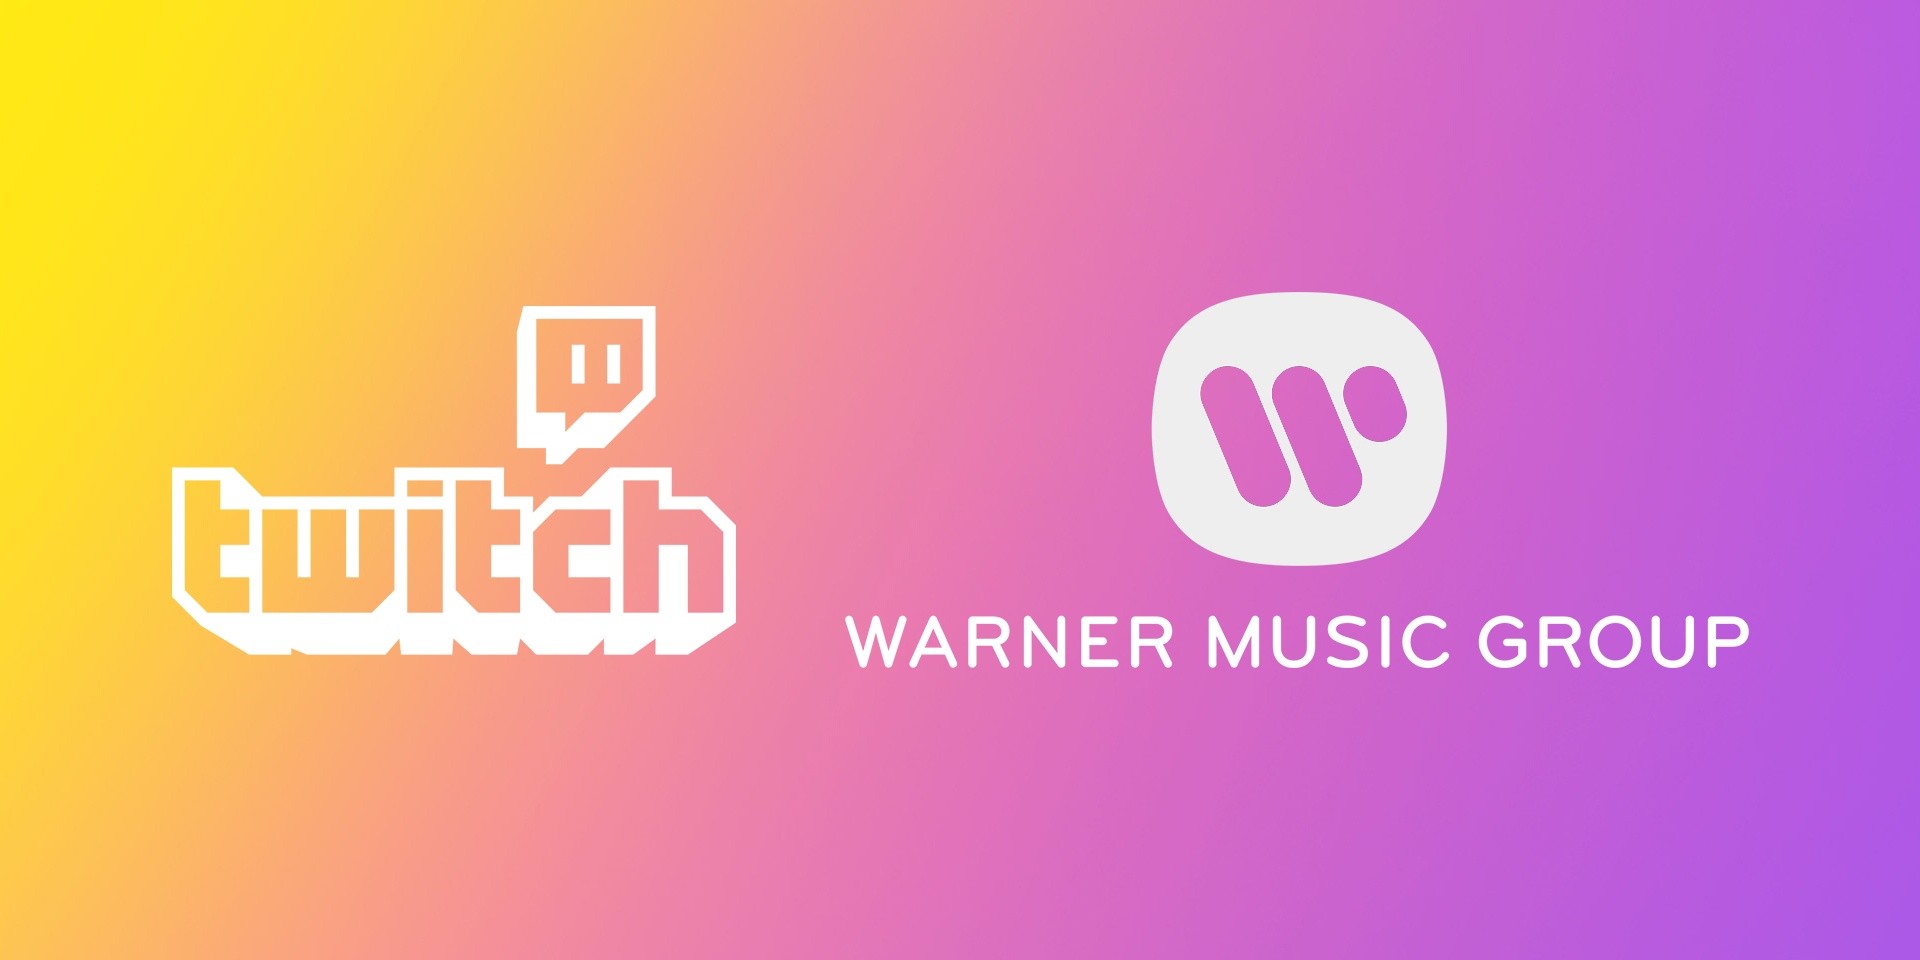 Warner Music Group partners with Twitch for new artist channels and music shows